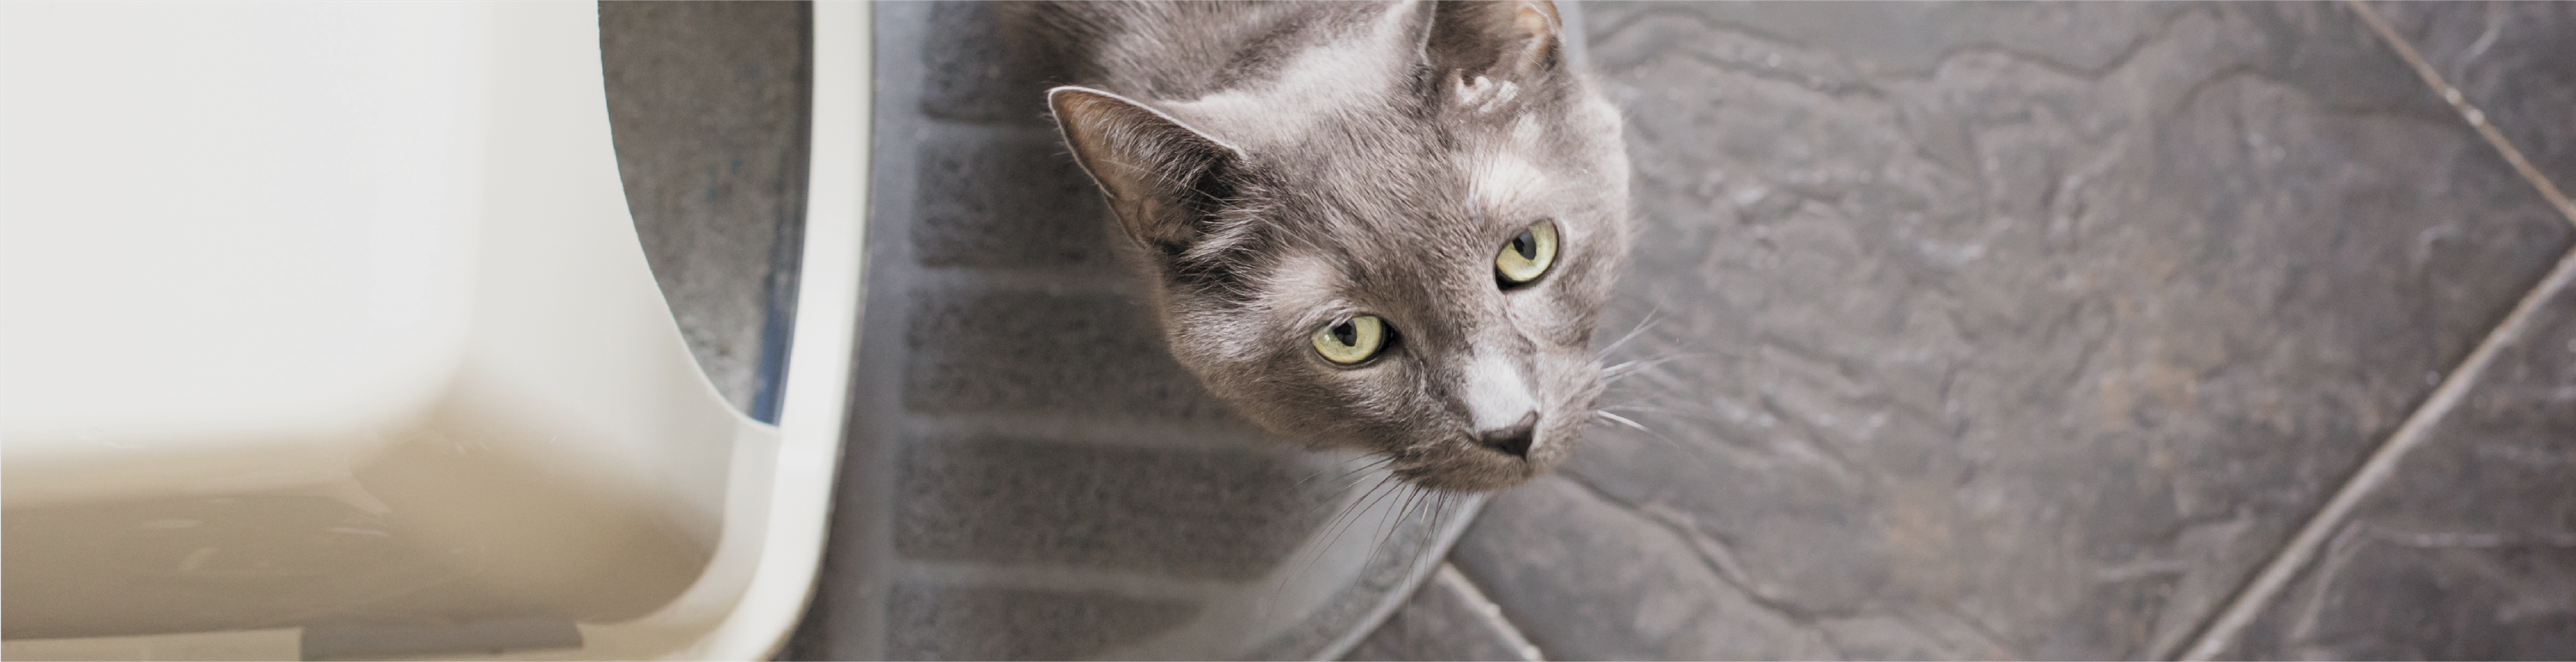 Grey cat with yellow eyes looking up at you after it stepped out of it's litter box onto grey tiles.